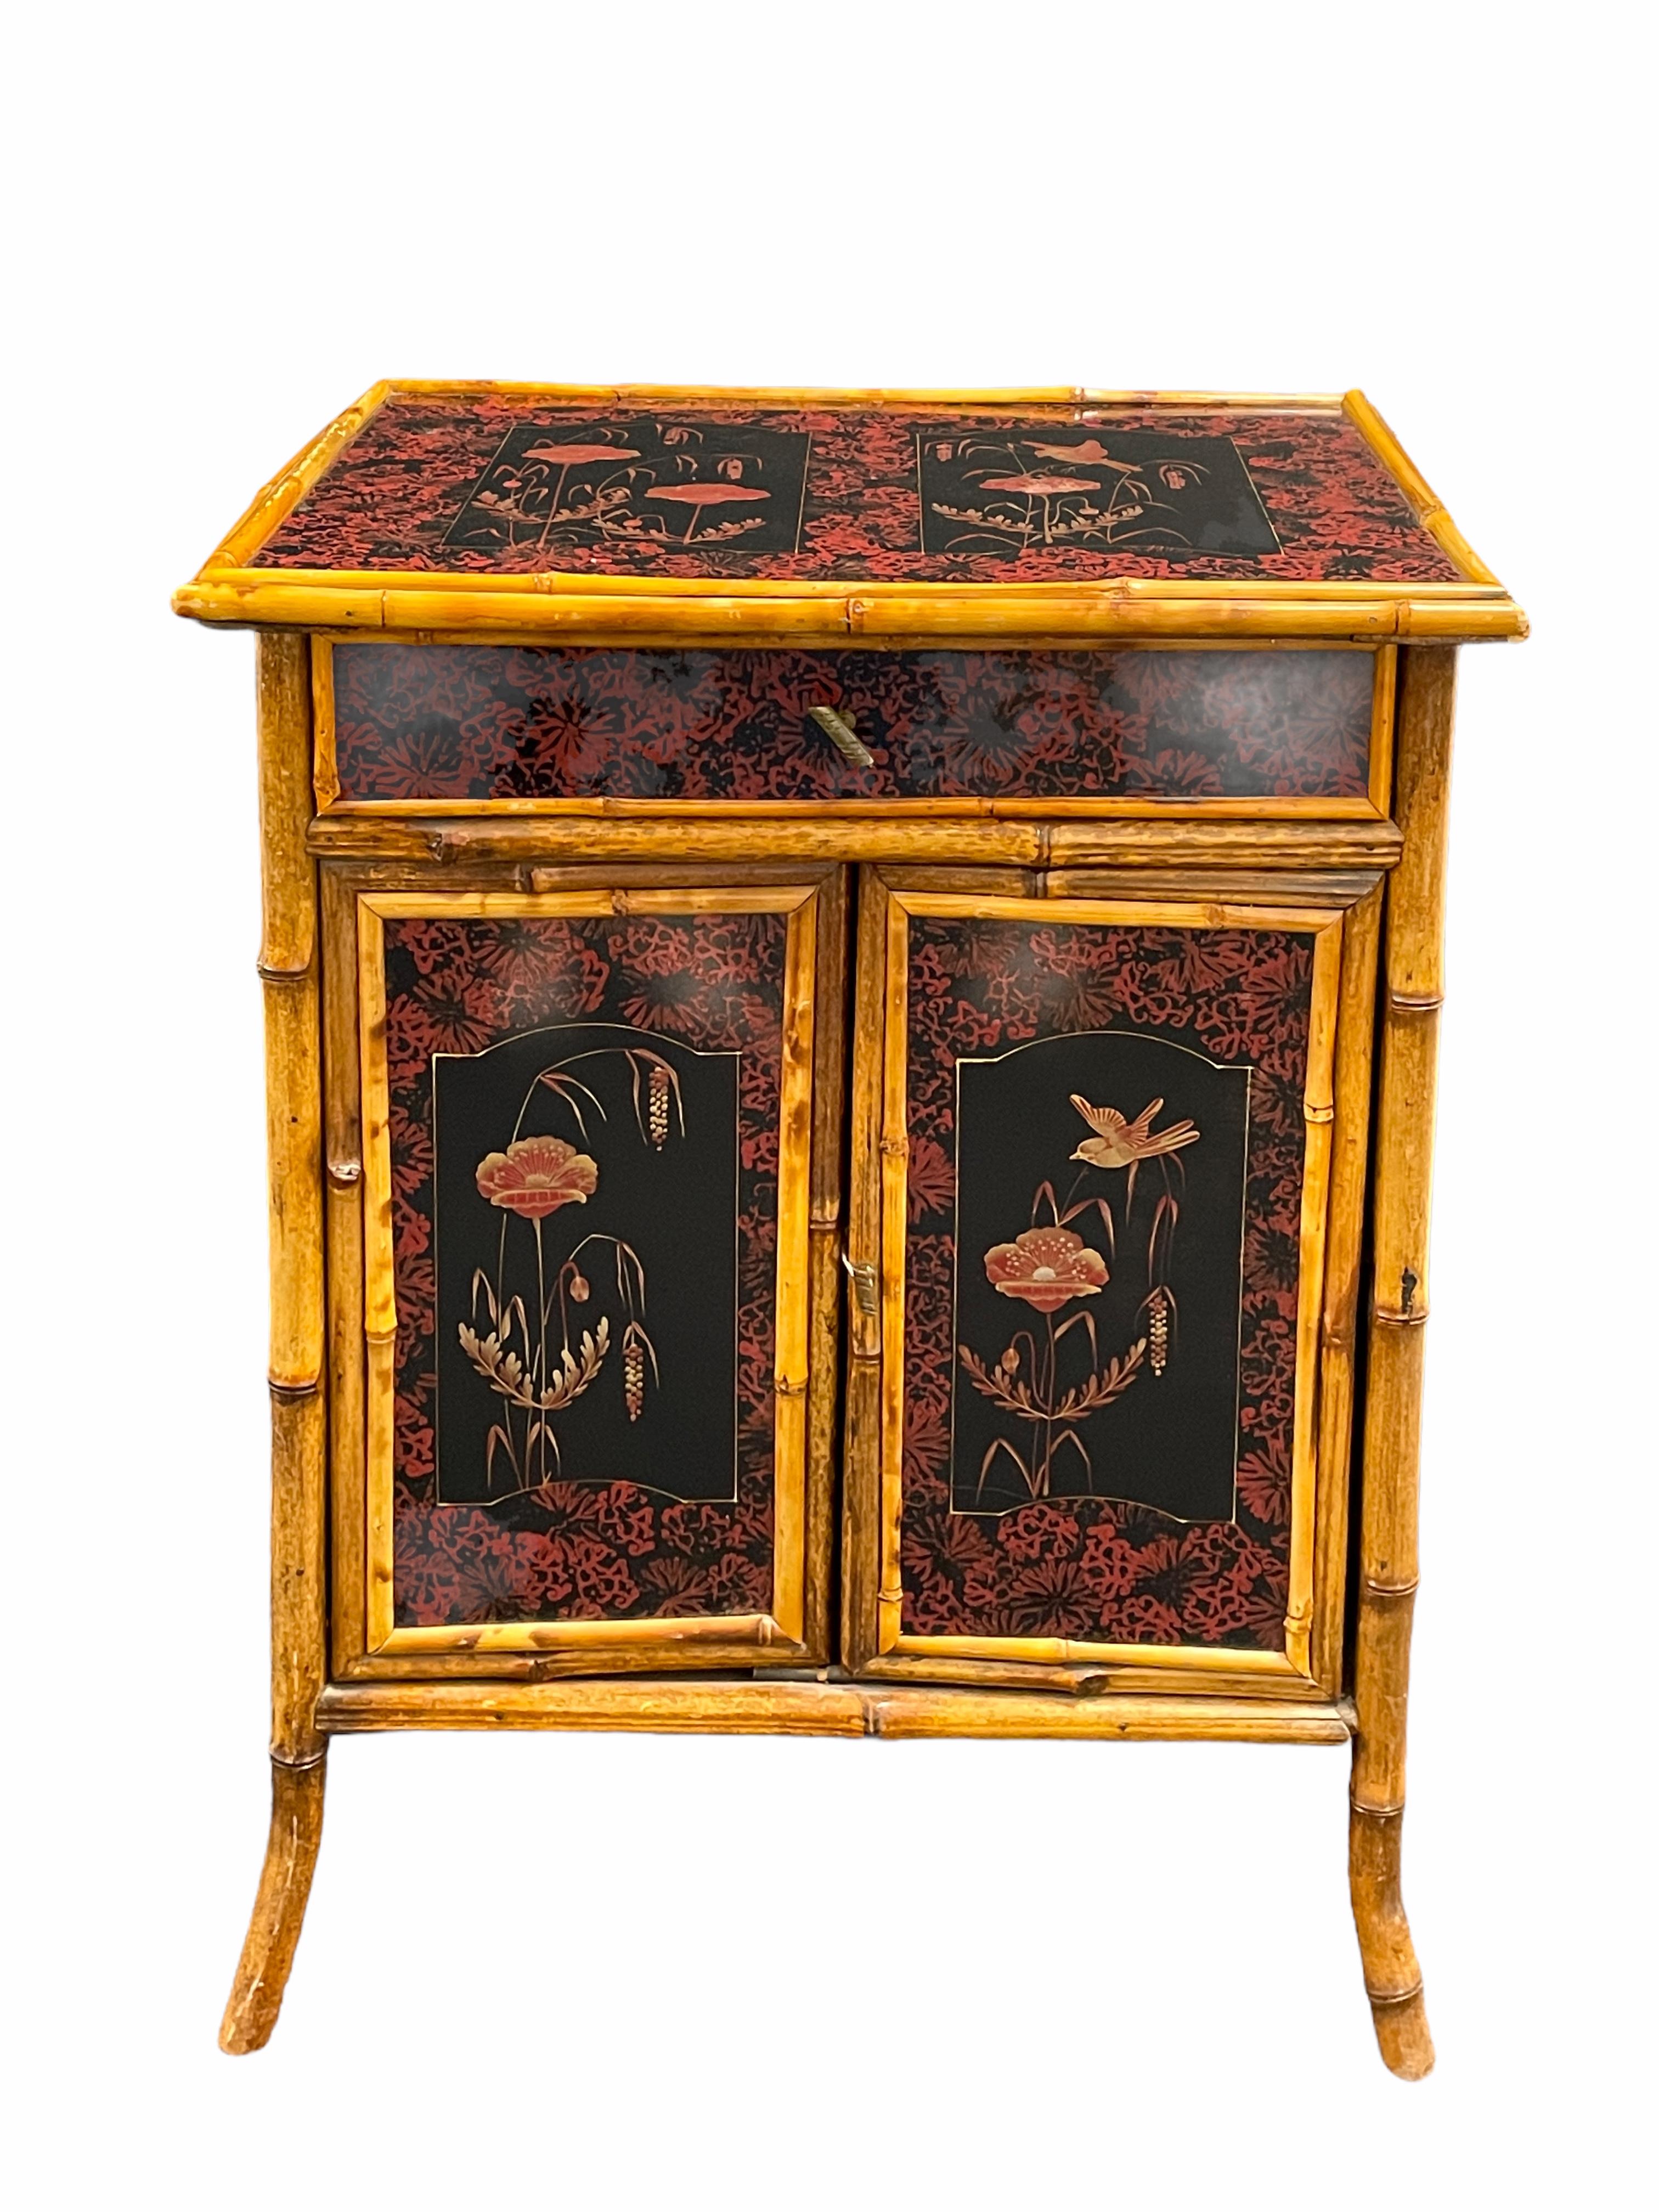 Beautiful Chinoiseries cupboard with drawer. Perfect as a furniture in your dressing room for your lingerie. It could also be great at the end of a narrow hallway with a mirror or artwork hung above it. The piece is in beautiful antique condition